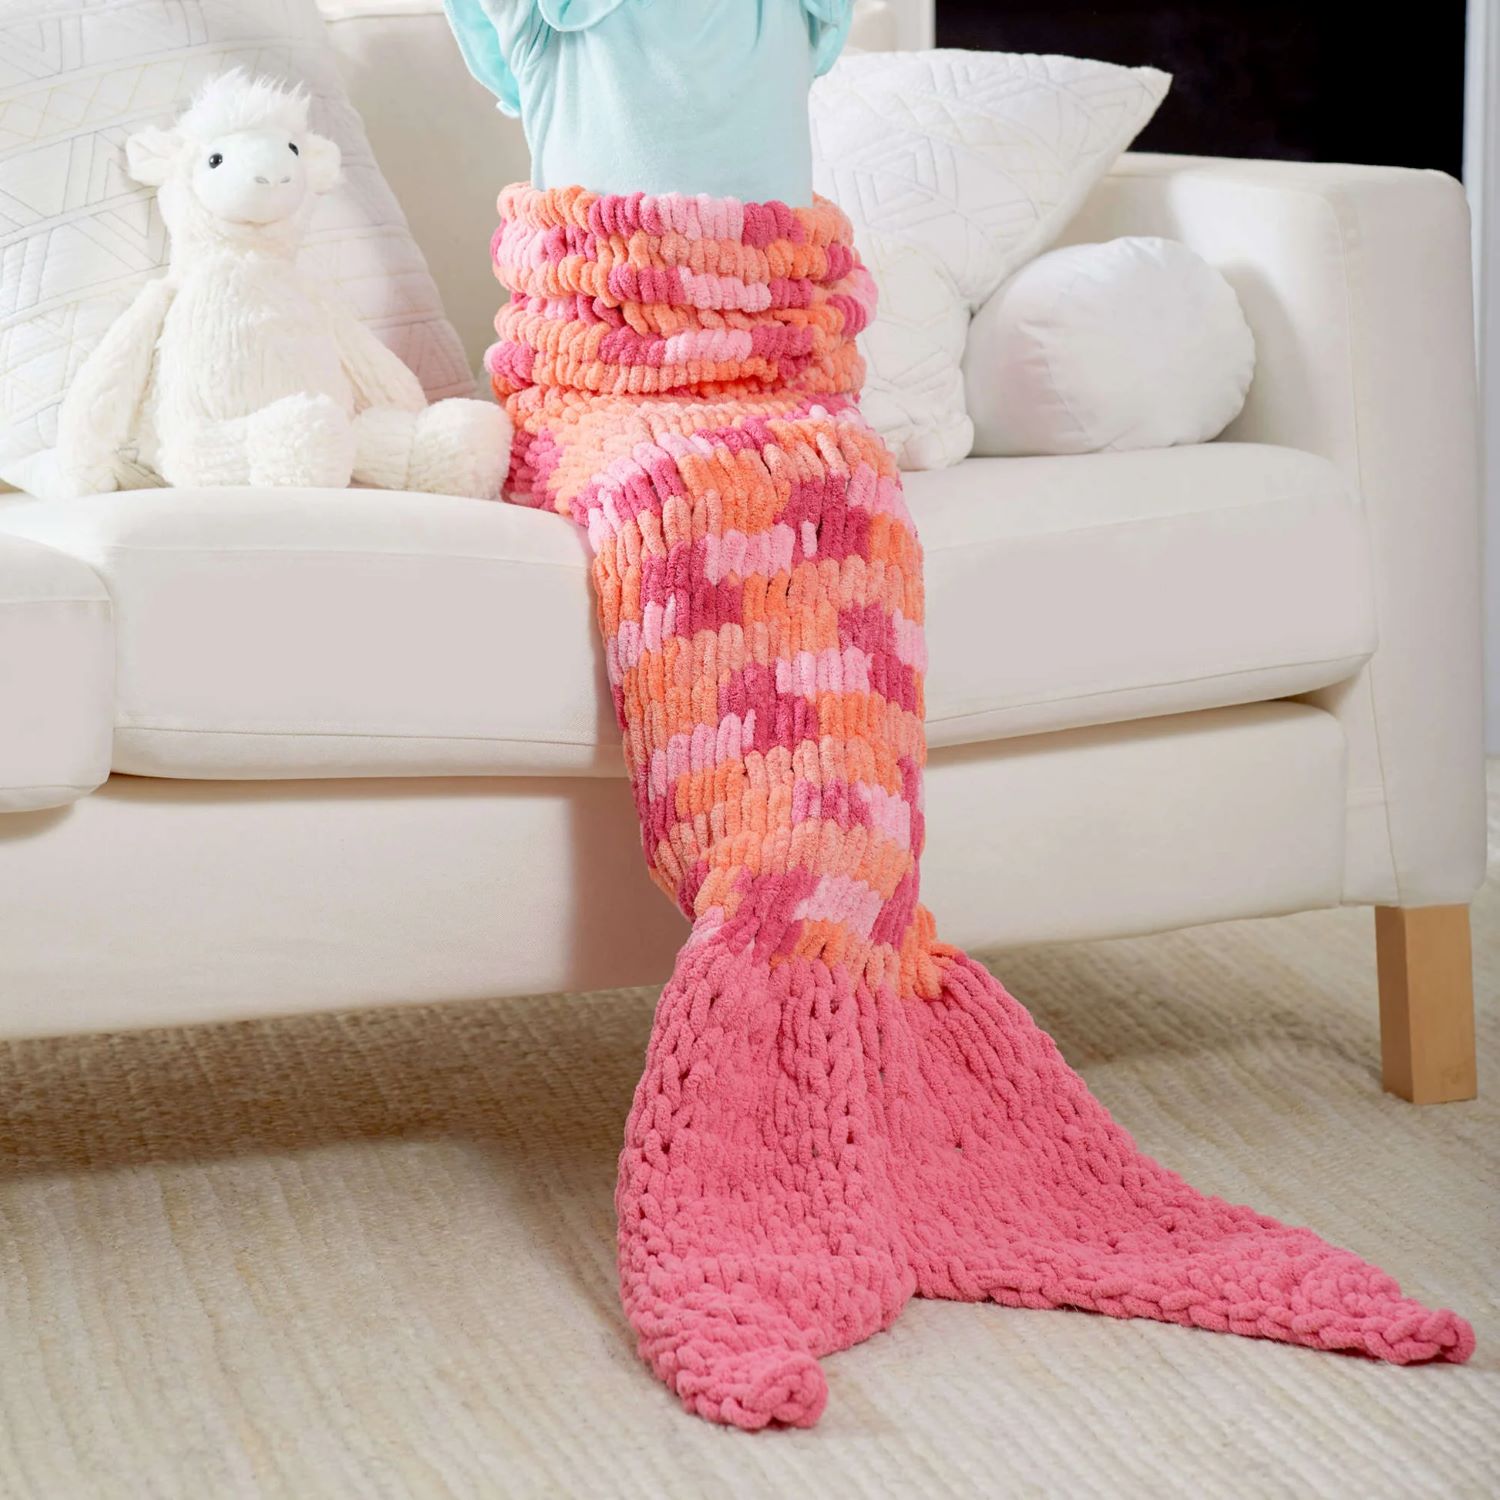 Where Can I Buy A Mermaid Tail Blanket